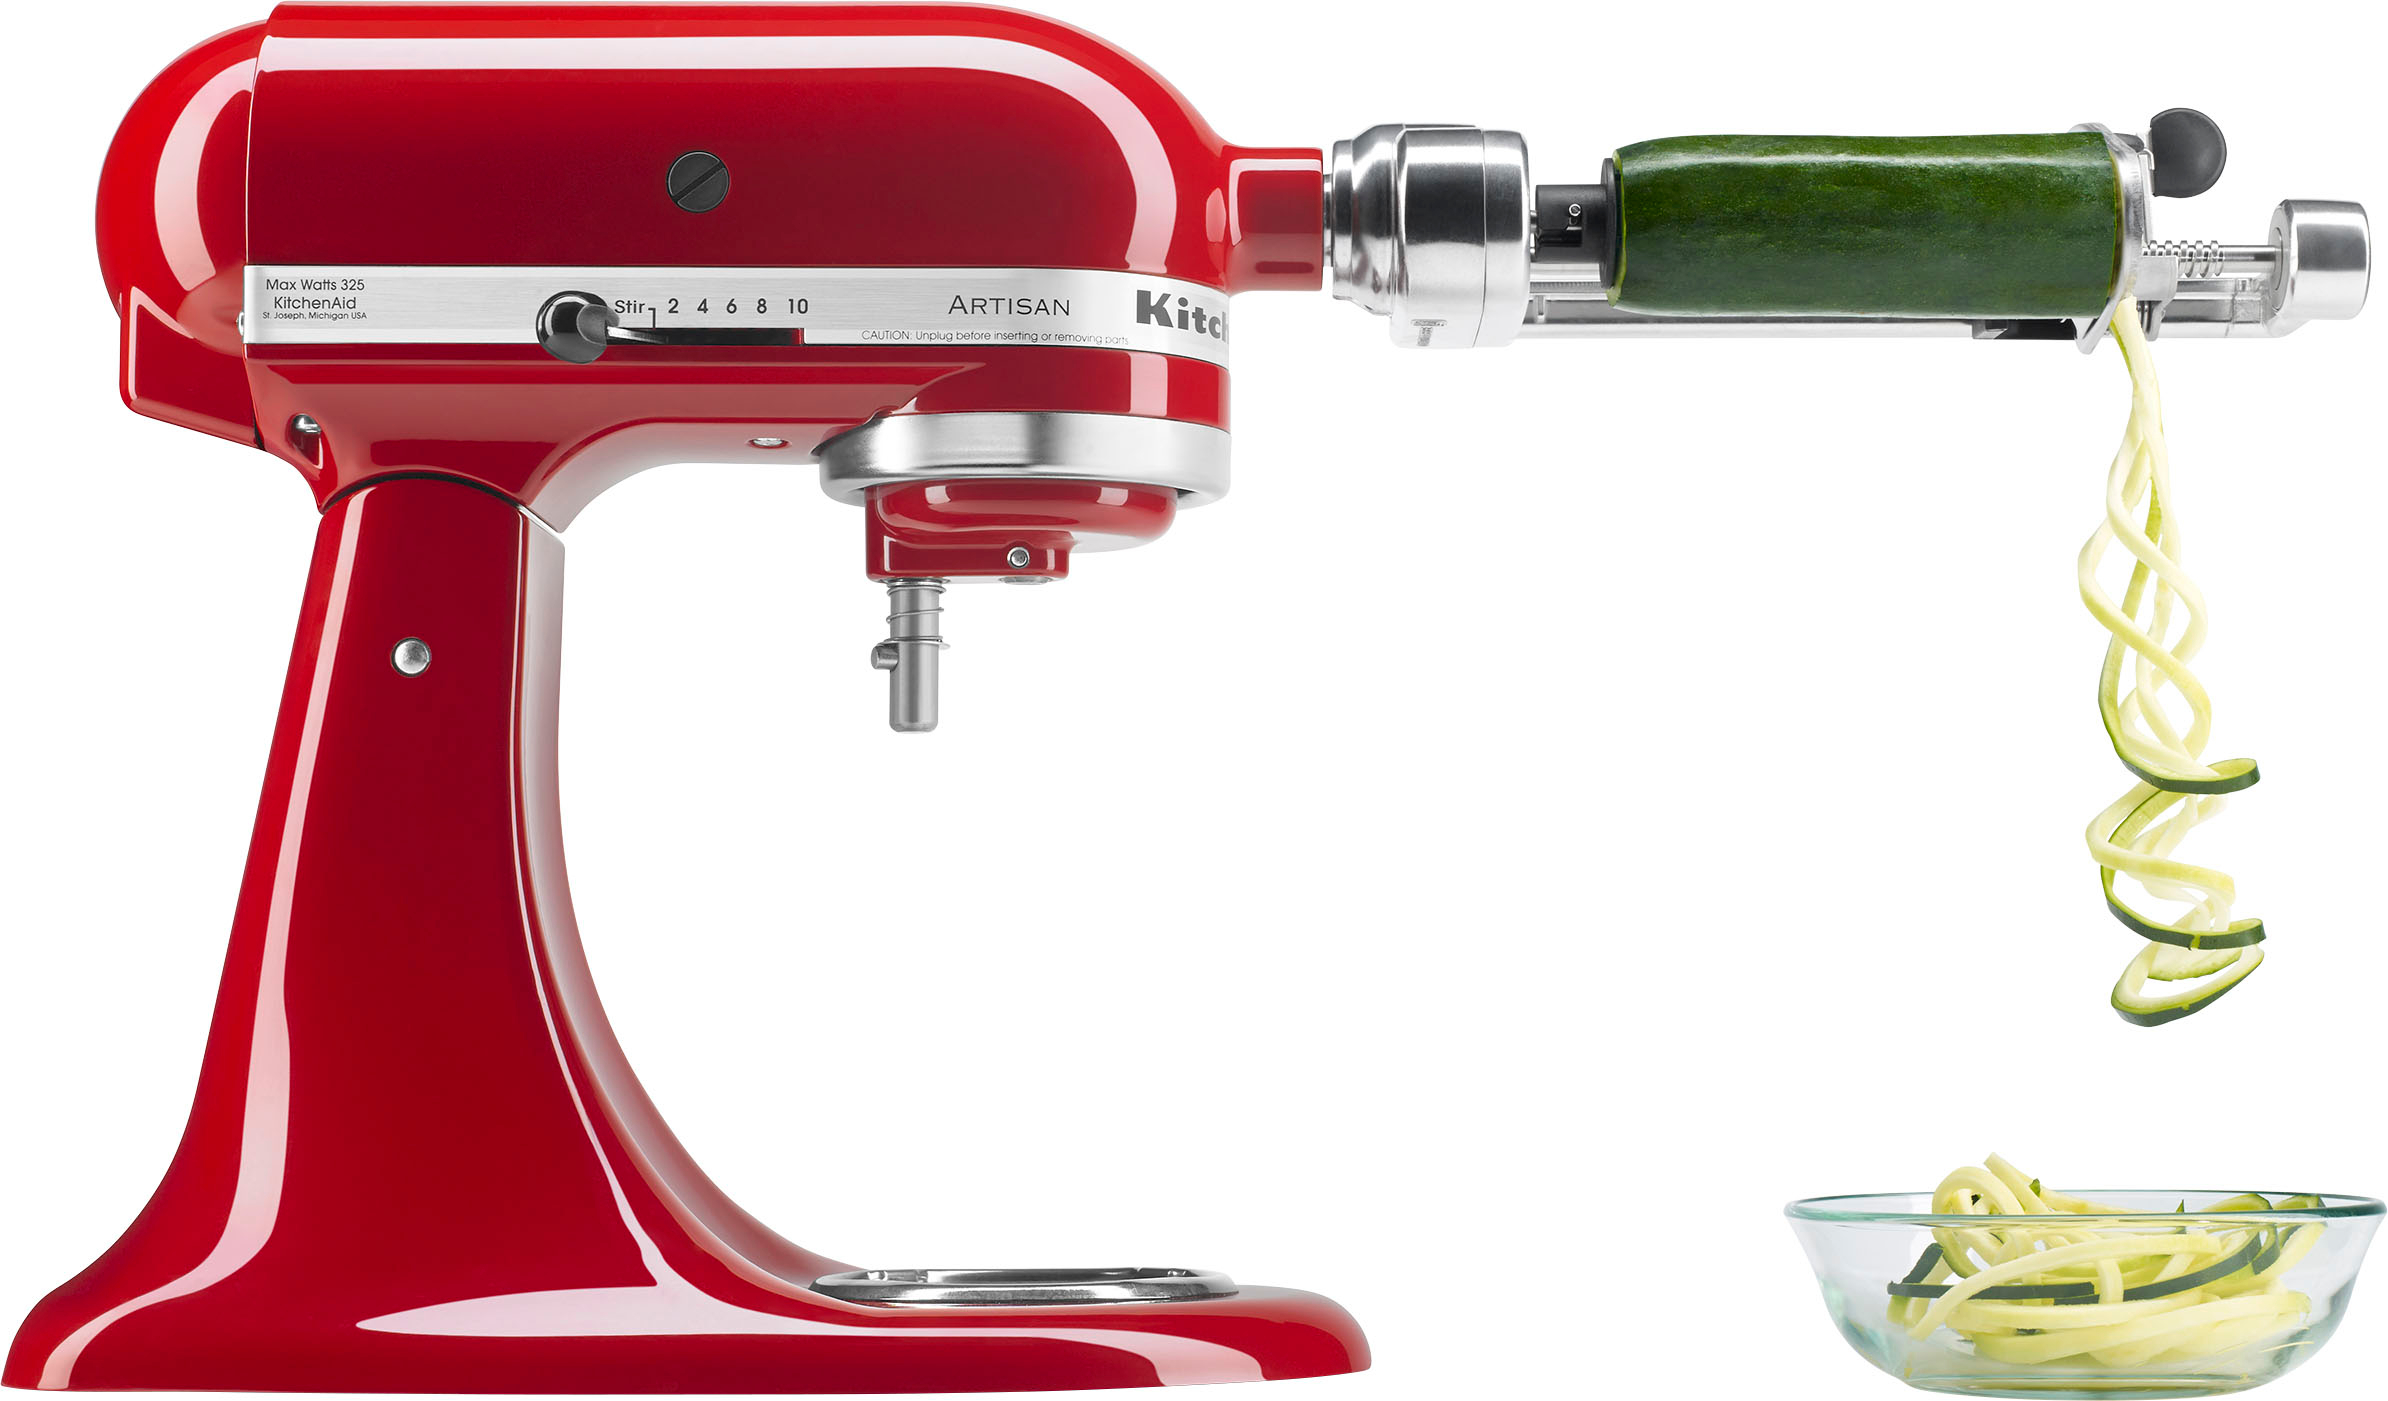 KitchenAid 5 Blade Spiralizer with Peel, Core and Slice $49.99 + Free Shipping & More